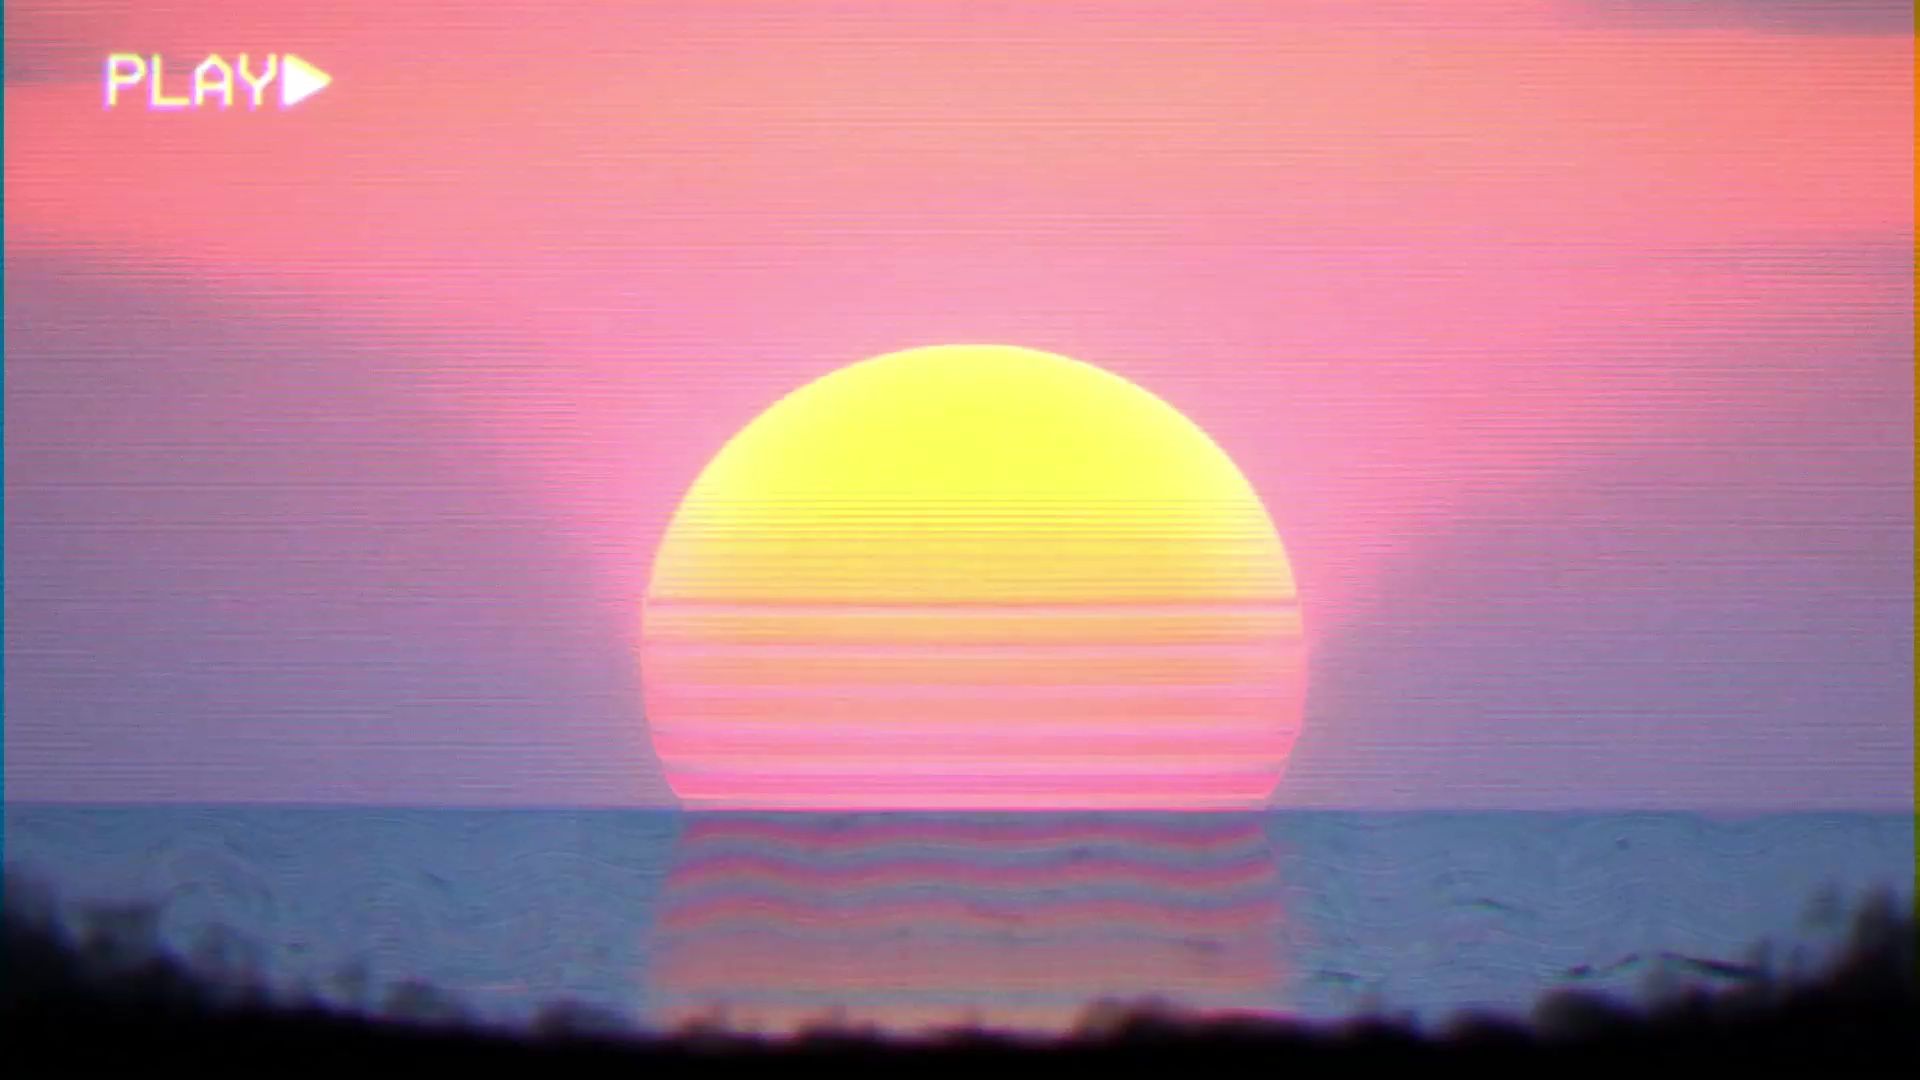 A sunset with an orange and pink sky - Synthwave